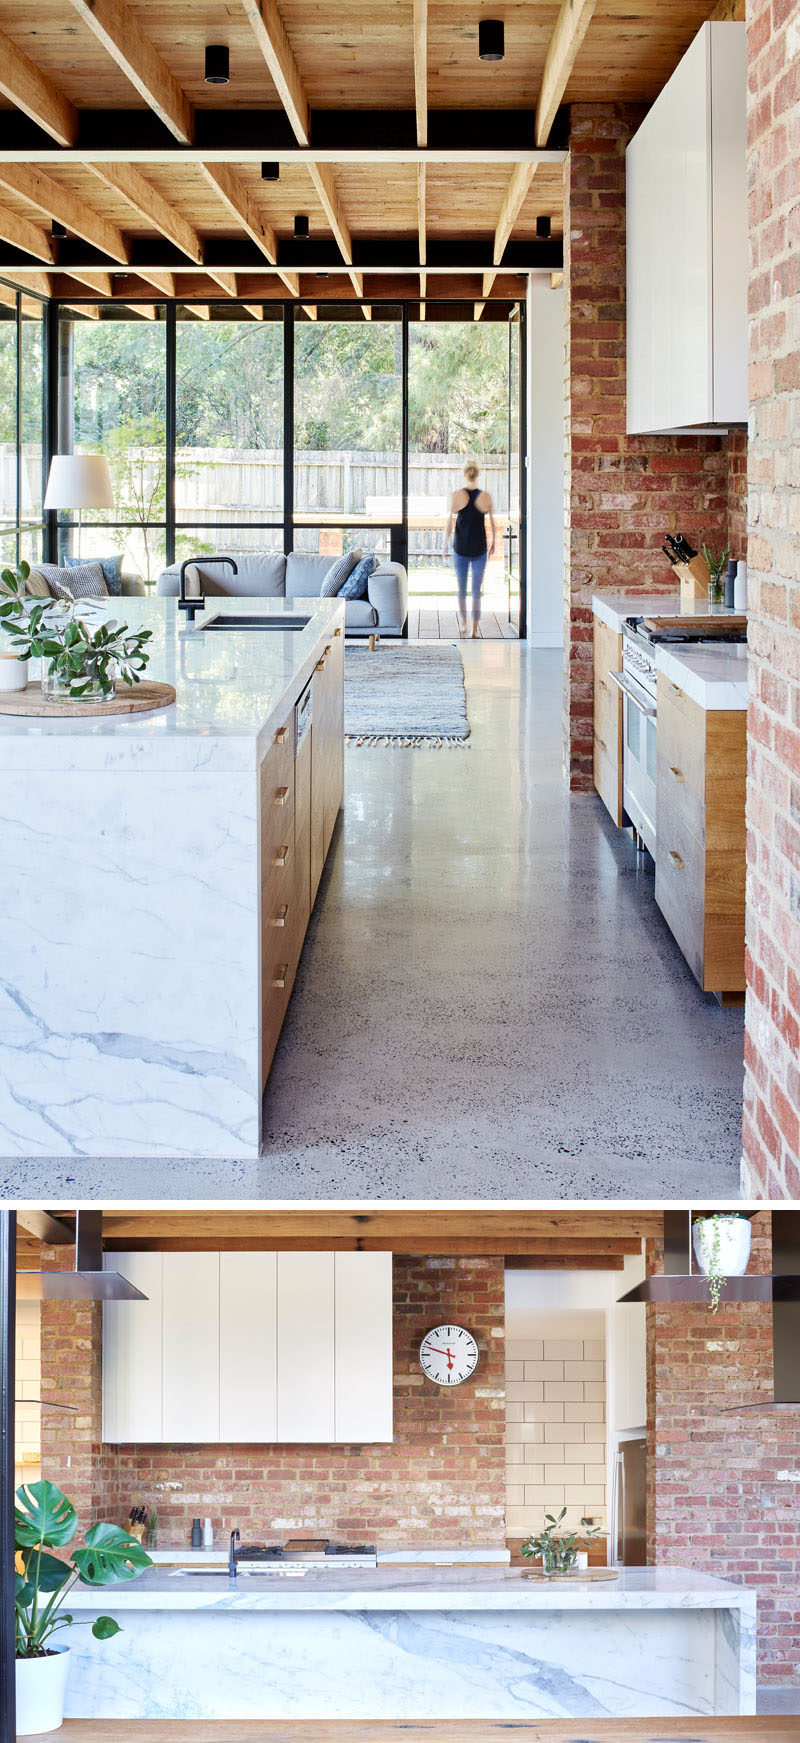 In this modern kitchen, red brick, some of which was recycled from the garden paving, covers the wall and compliments the timber paneled cabinet doors and the Statuario marble used for the countertops and island.